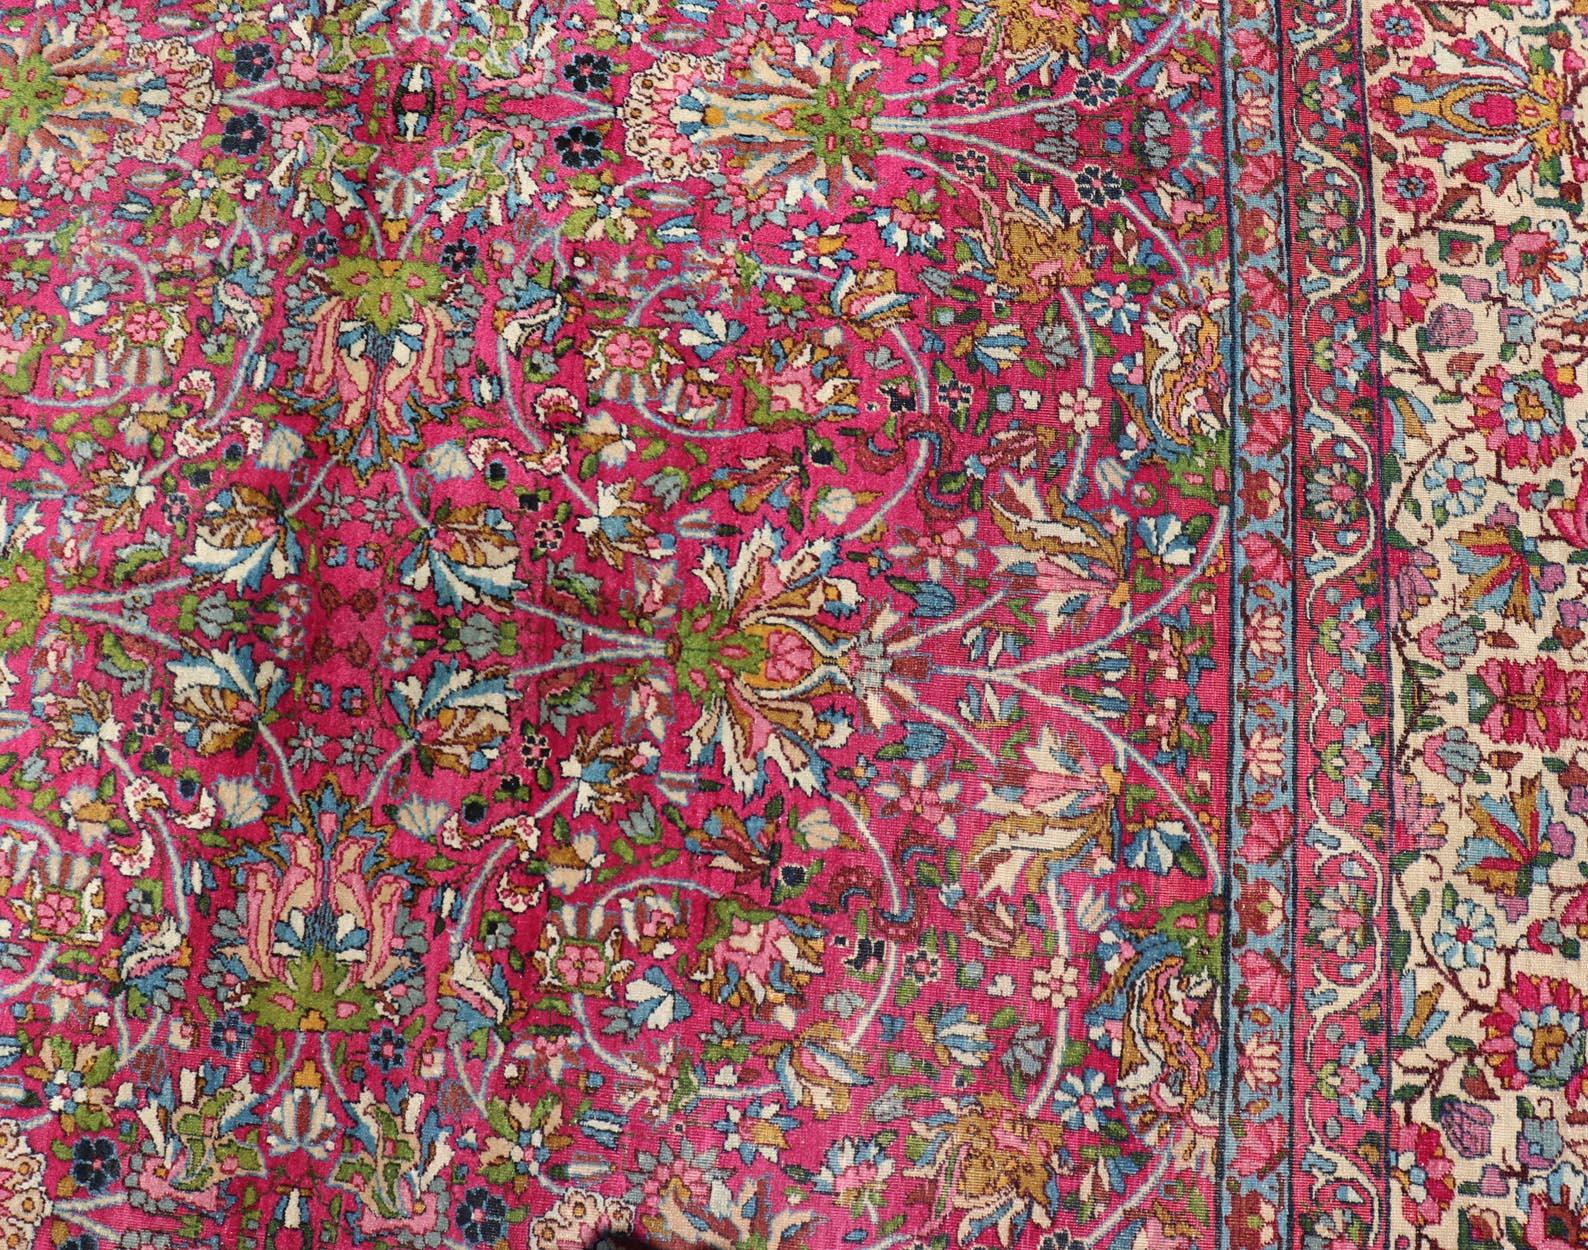 Hand-Knotted  Antique Persian Lavar Kerman Rug with All-Over Floral Design In Jewel Tones  For Sale